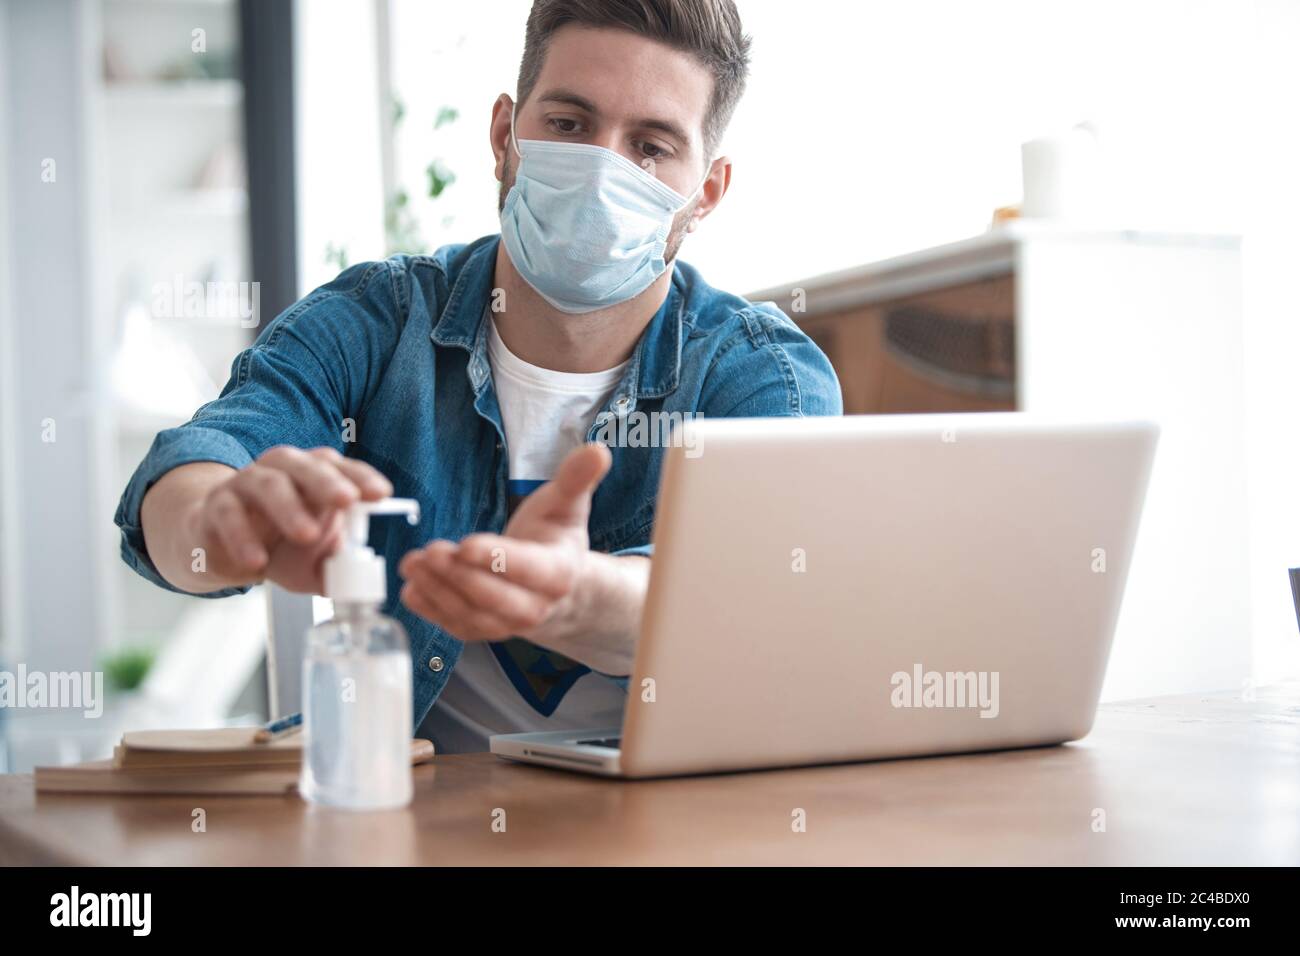 Coronavirus. Man working from home wearing protective mask. Cleaning his hands with sanitizer gel Stock Photo